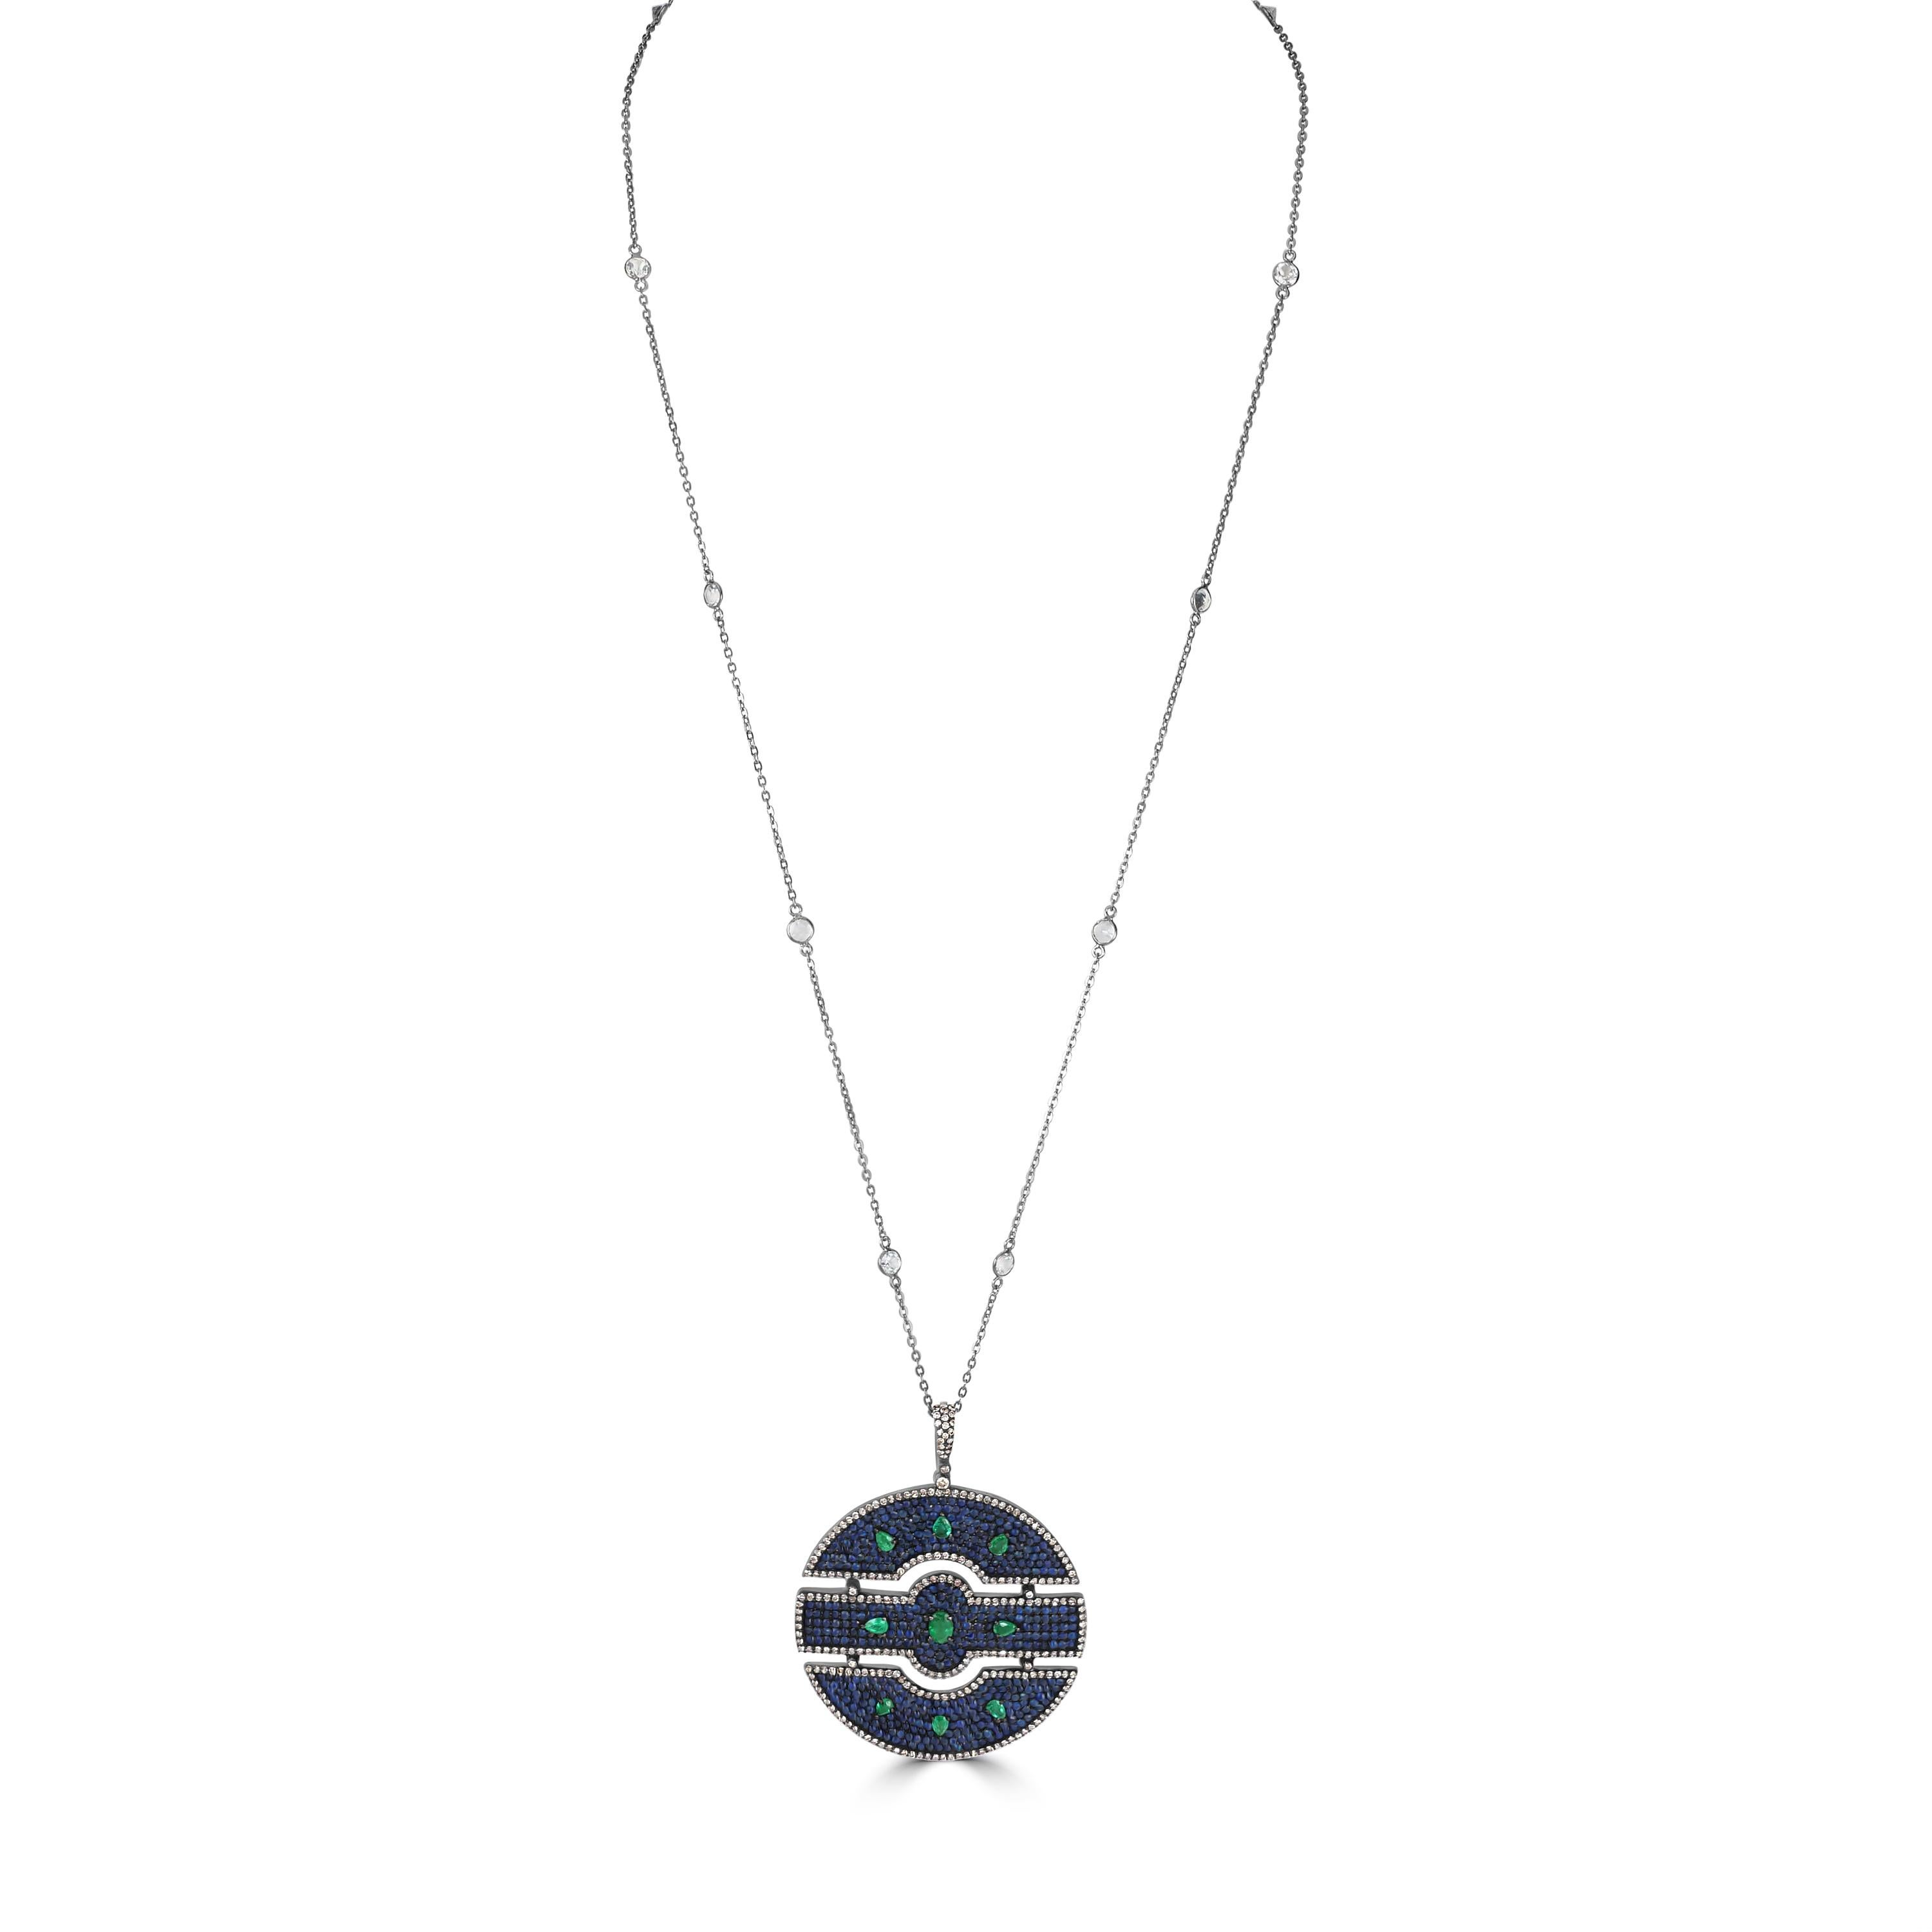 Introducing our stunning Victorian 13.6 Cttw. Blue Sapphire, Emerald, Topaz, and Diamond Pendant Necklace, a masterpiece of timeless elegance and sophistication.

This exquisite pendant necklace features a sterling silver chain adorned with